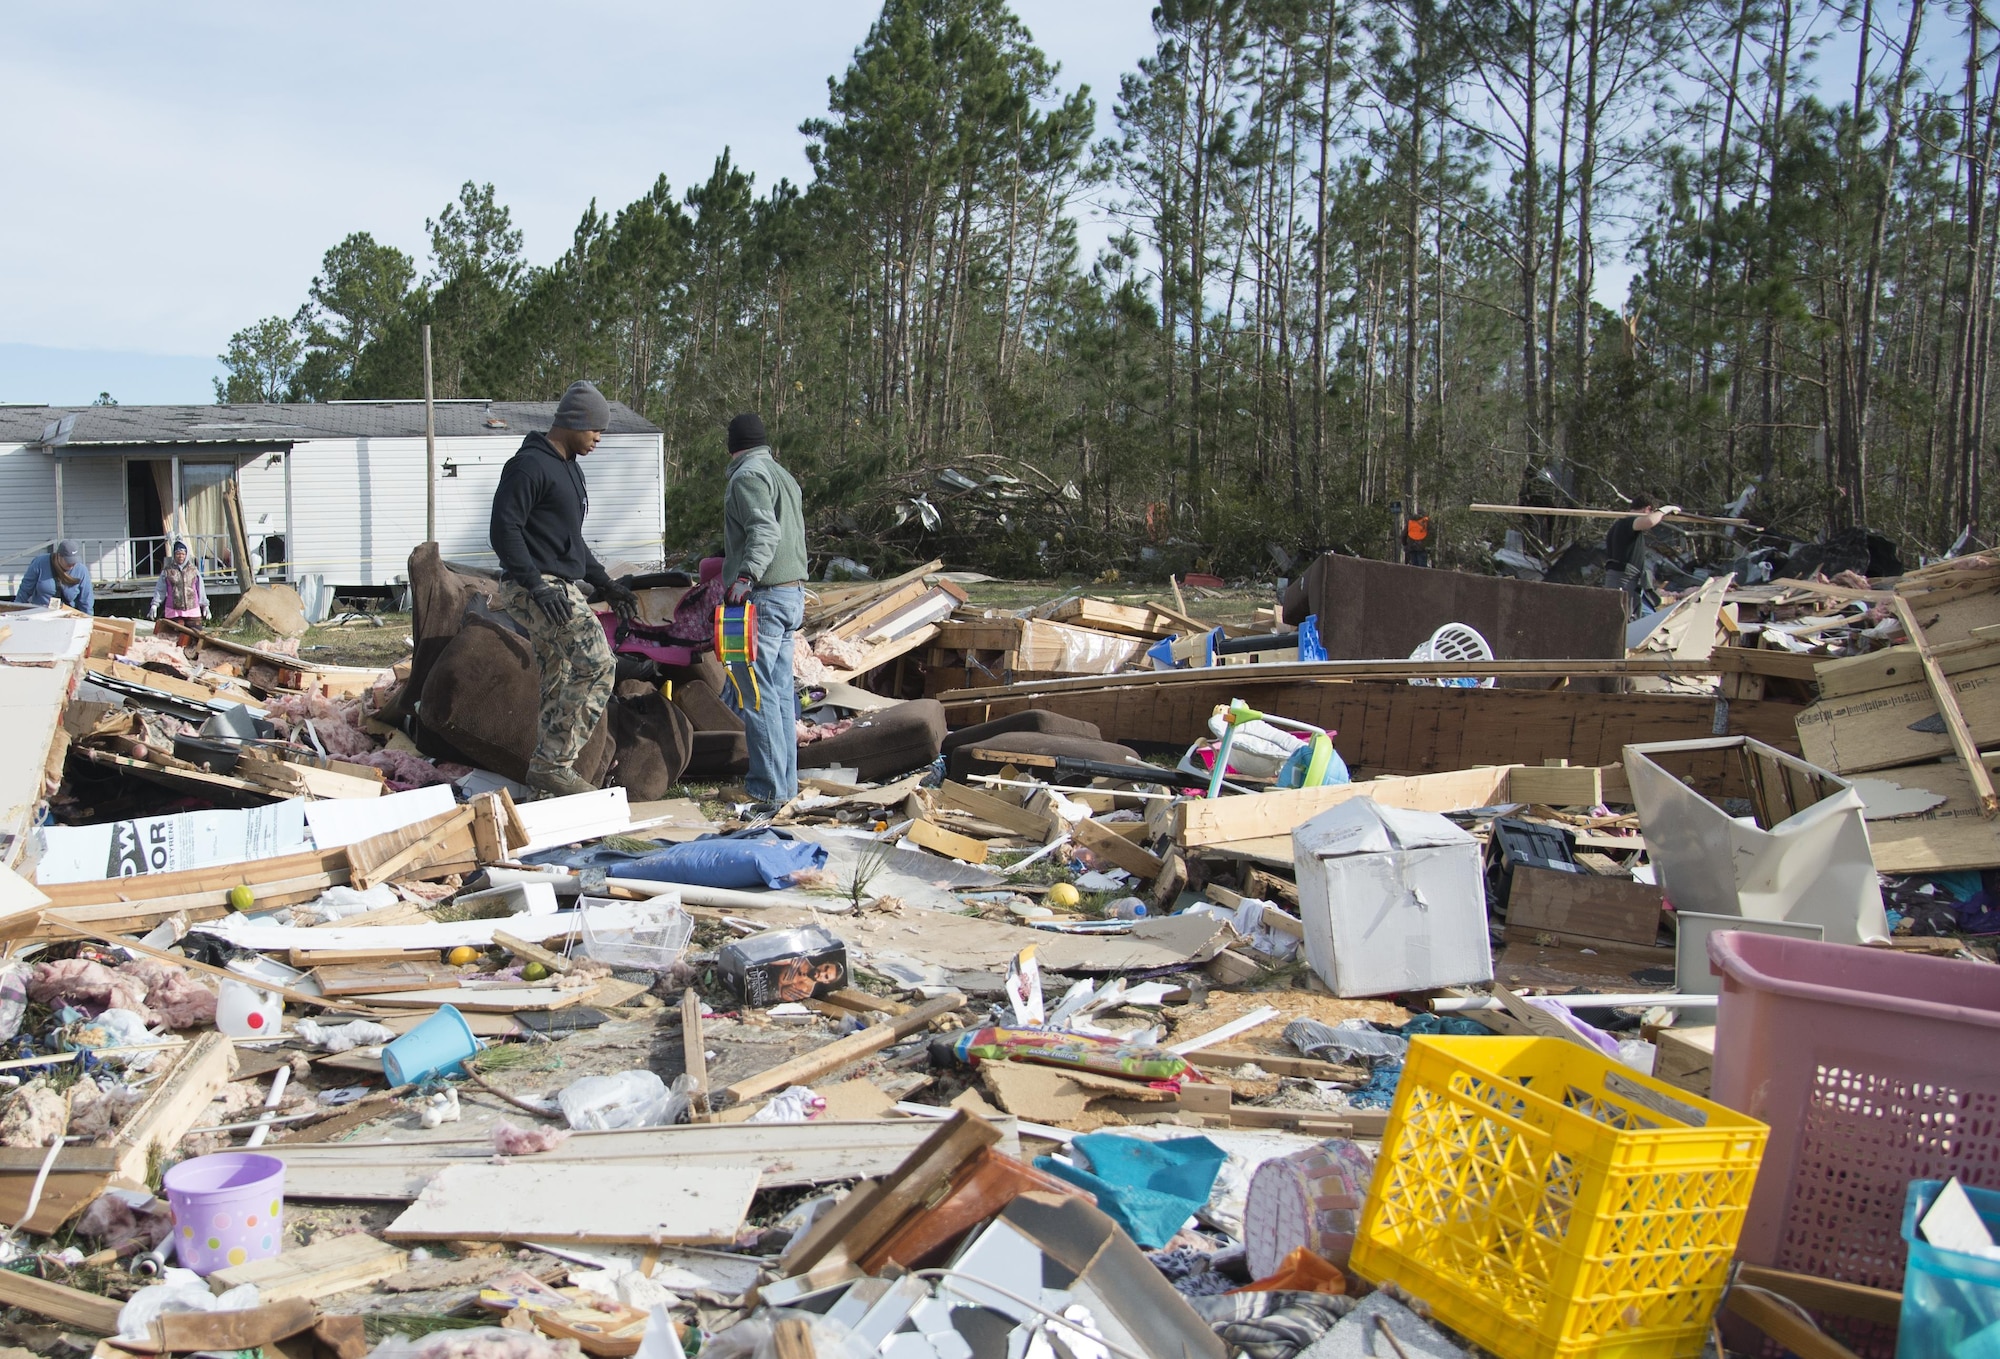 Two Moody Air Force Base Airmen search for meaningful belongings amongst debris left in the wake of a tornado, Jan. 28, 2017, in Adel, Ga. The tornado killed 15 people and was later deemed an EF3, the strongest tornado to touch down in the county’s history. (U.S. Air Force photo by 2d Lt. Kaitlin Toner)